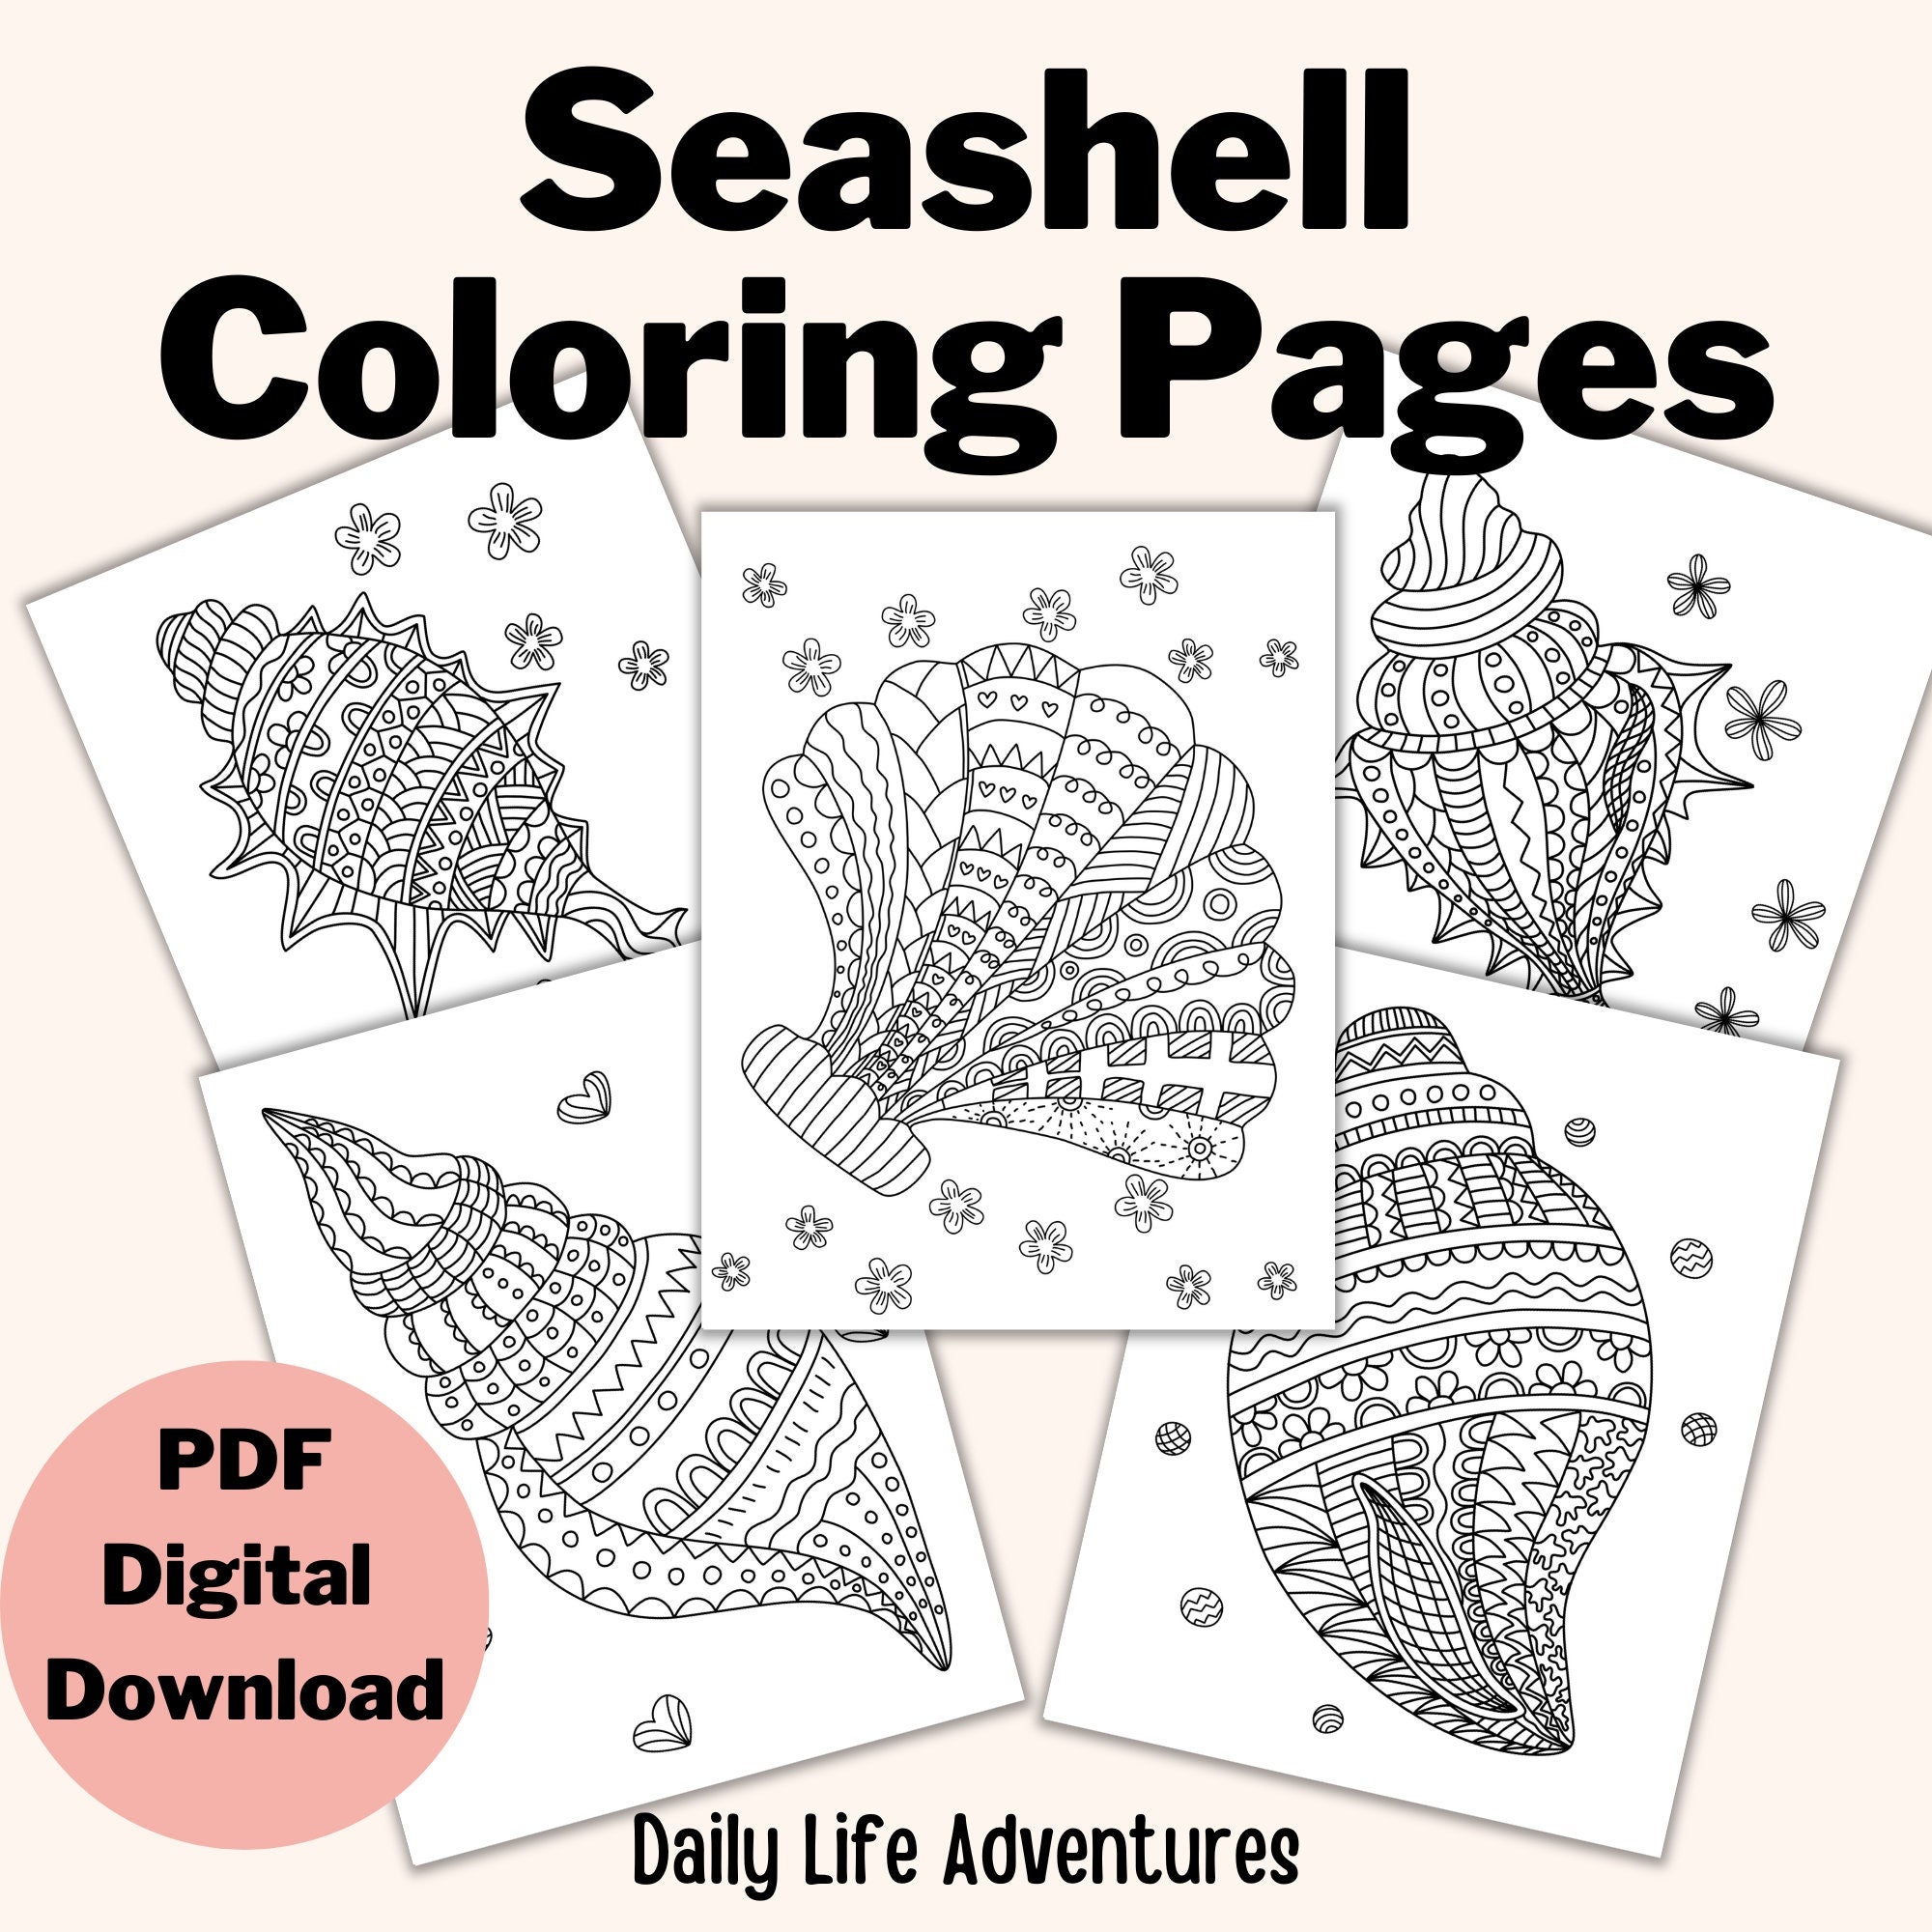 Seashell coloring pages printable coloring pages adult coloring pages